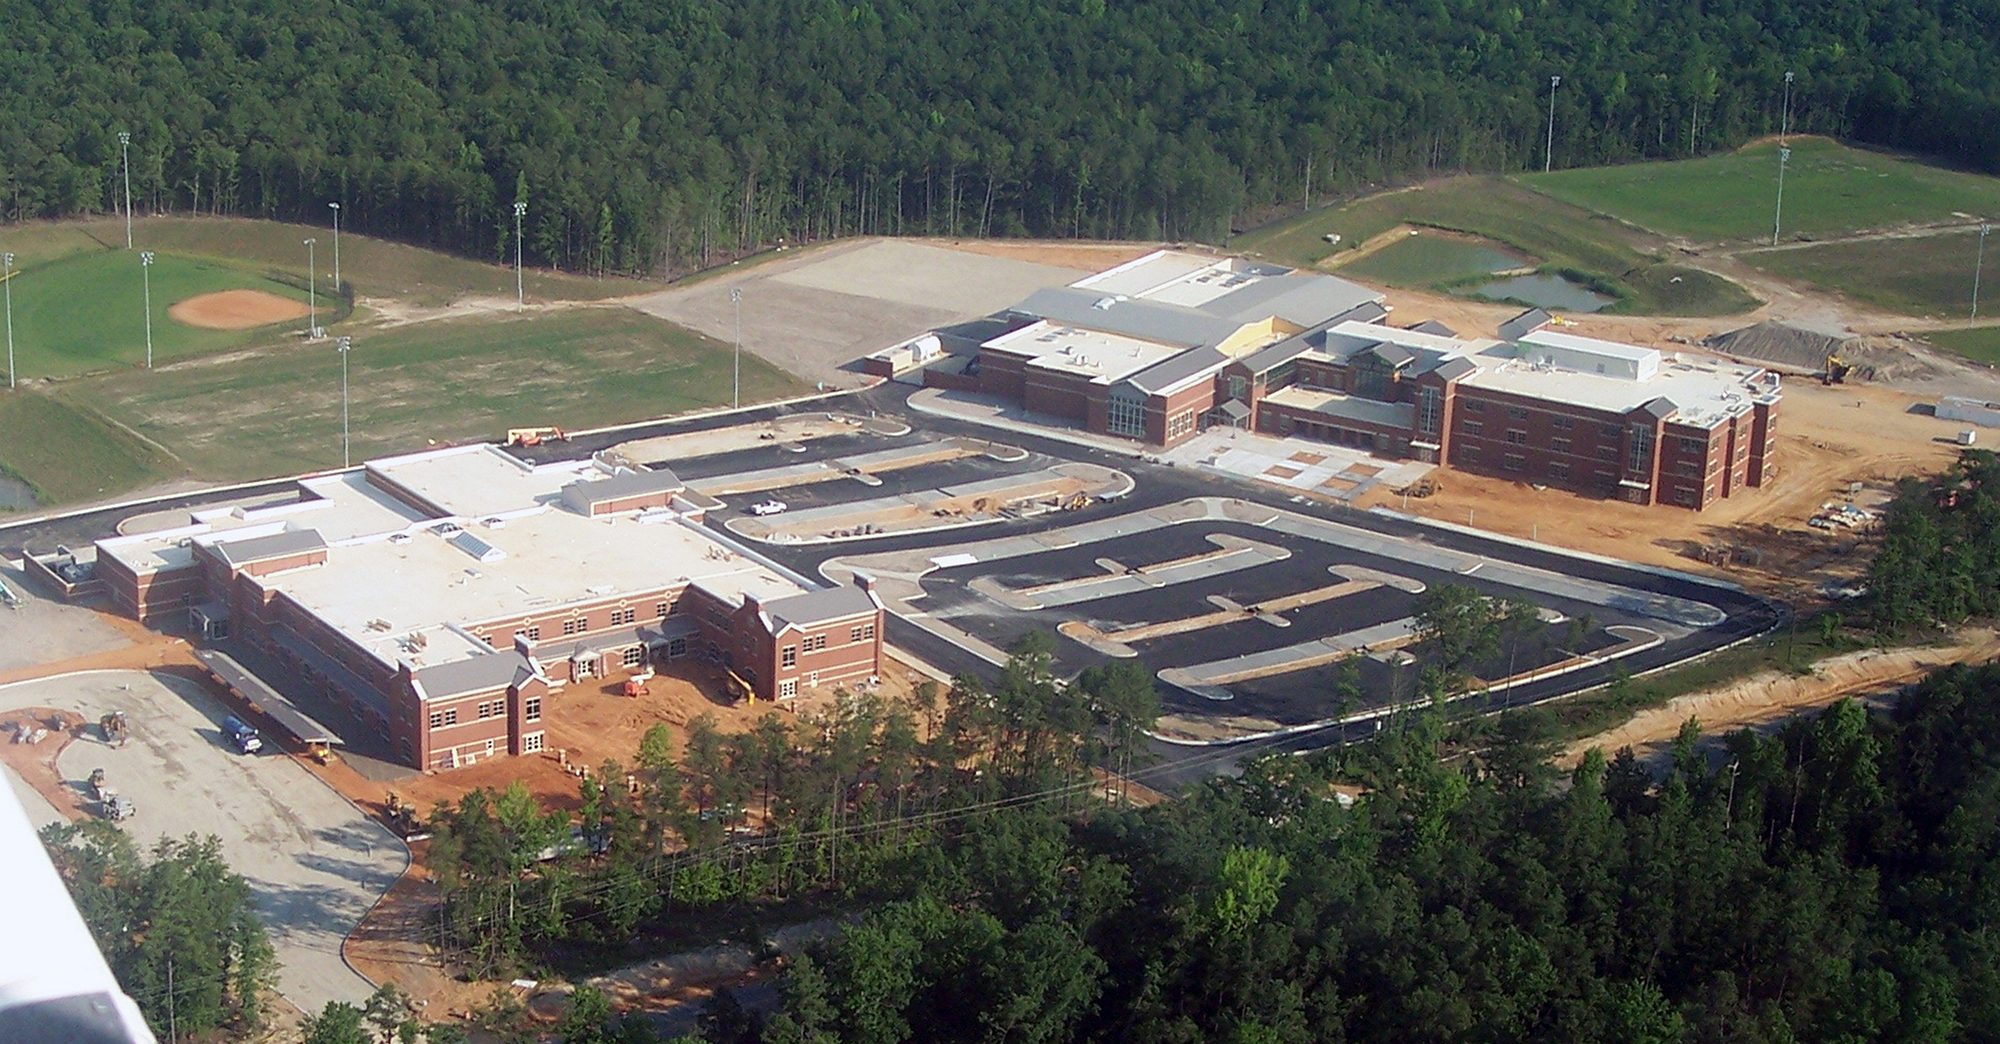 Aerial view of Lois S. Hornsby Middle School and James J. Blayton Elementary School